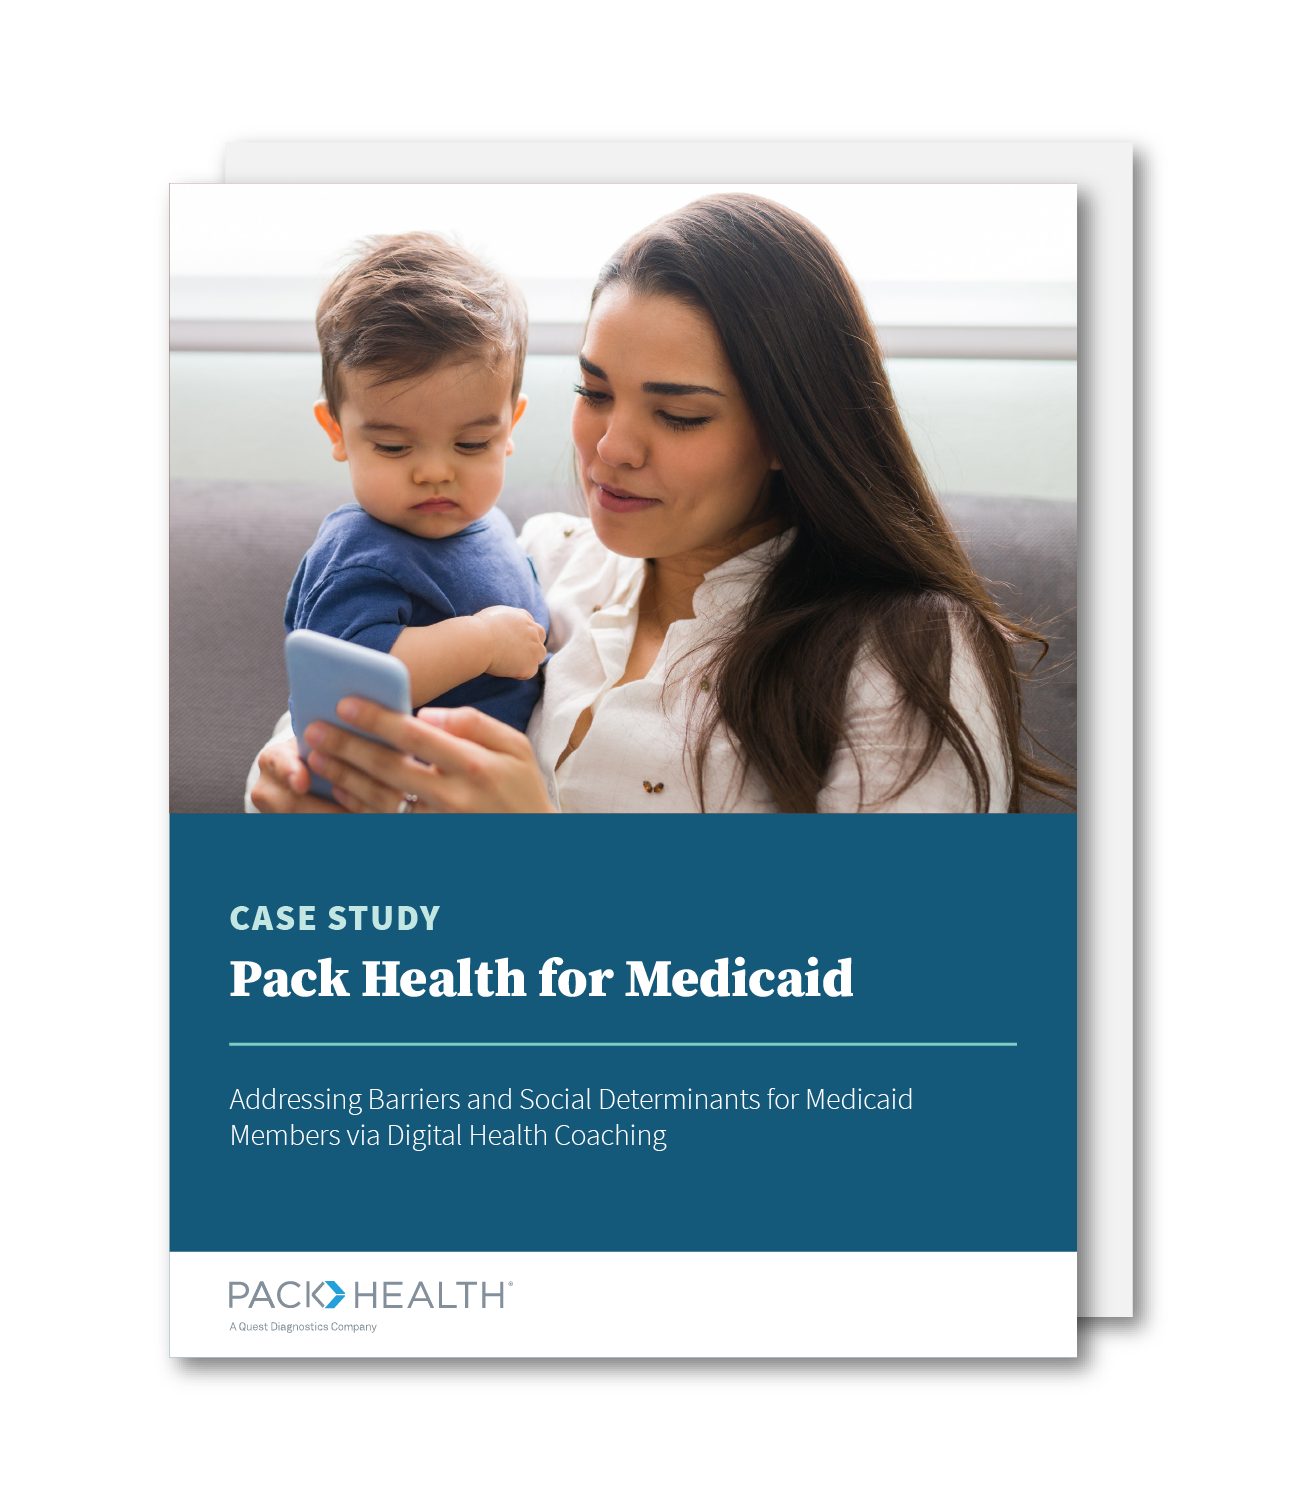 Case Study: Pack Health for Medicaid